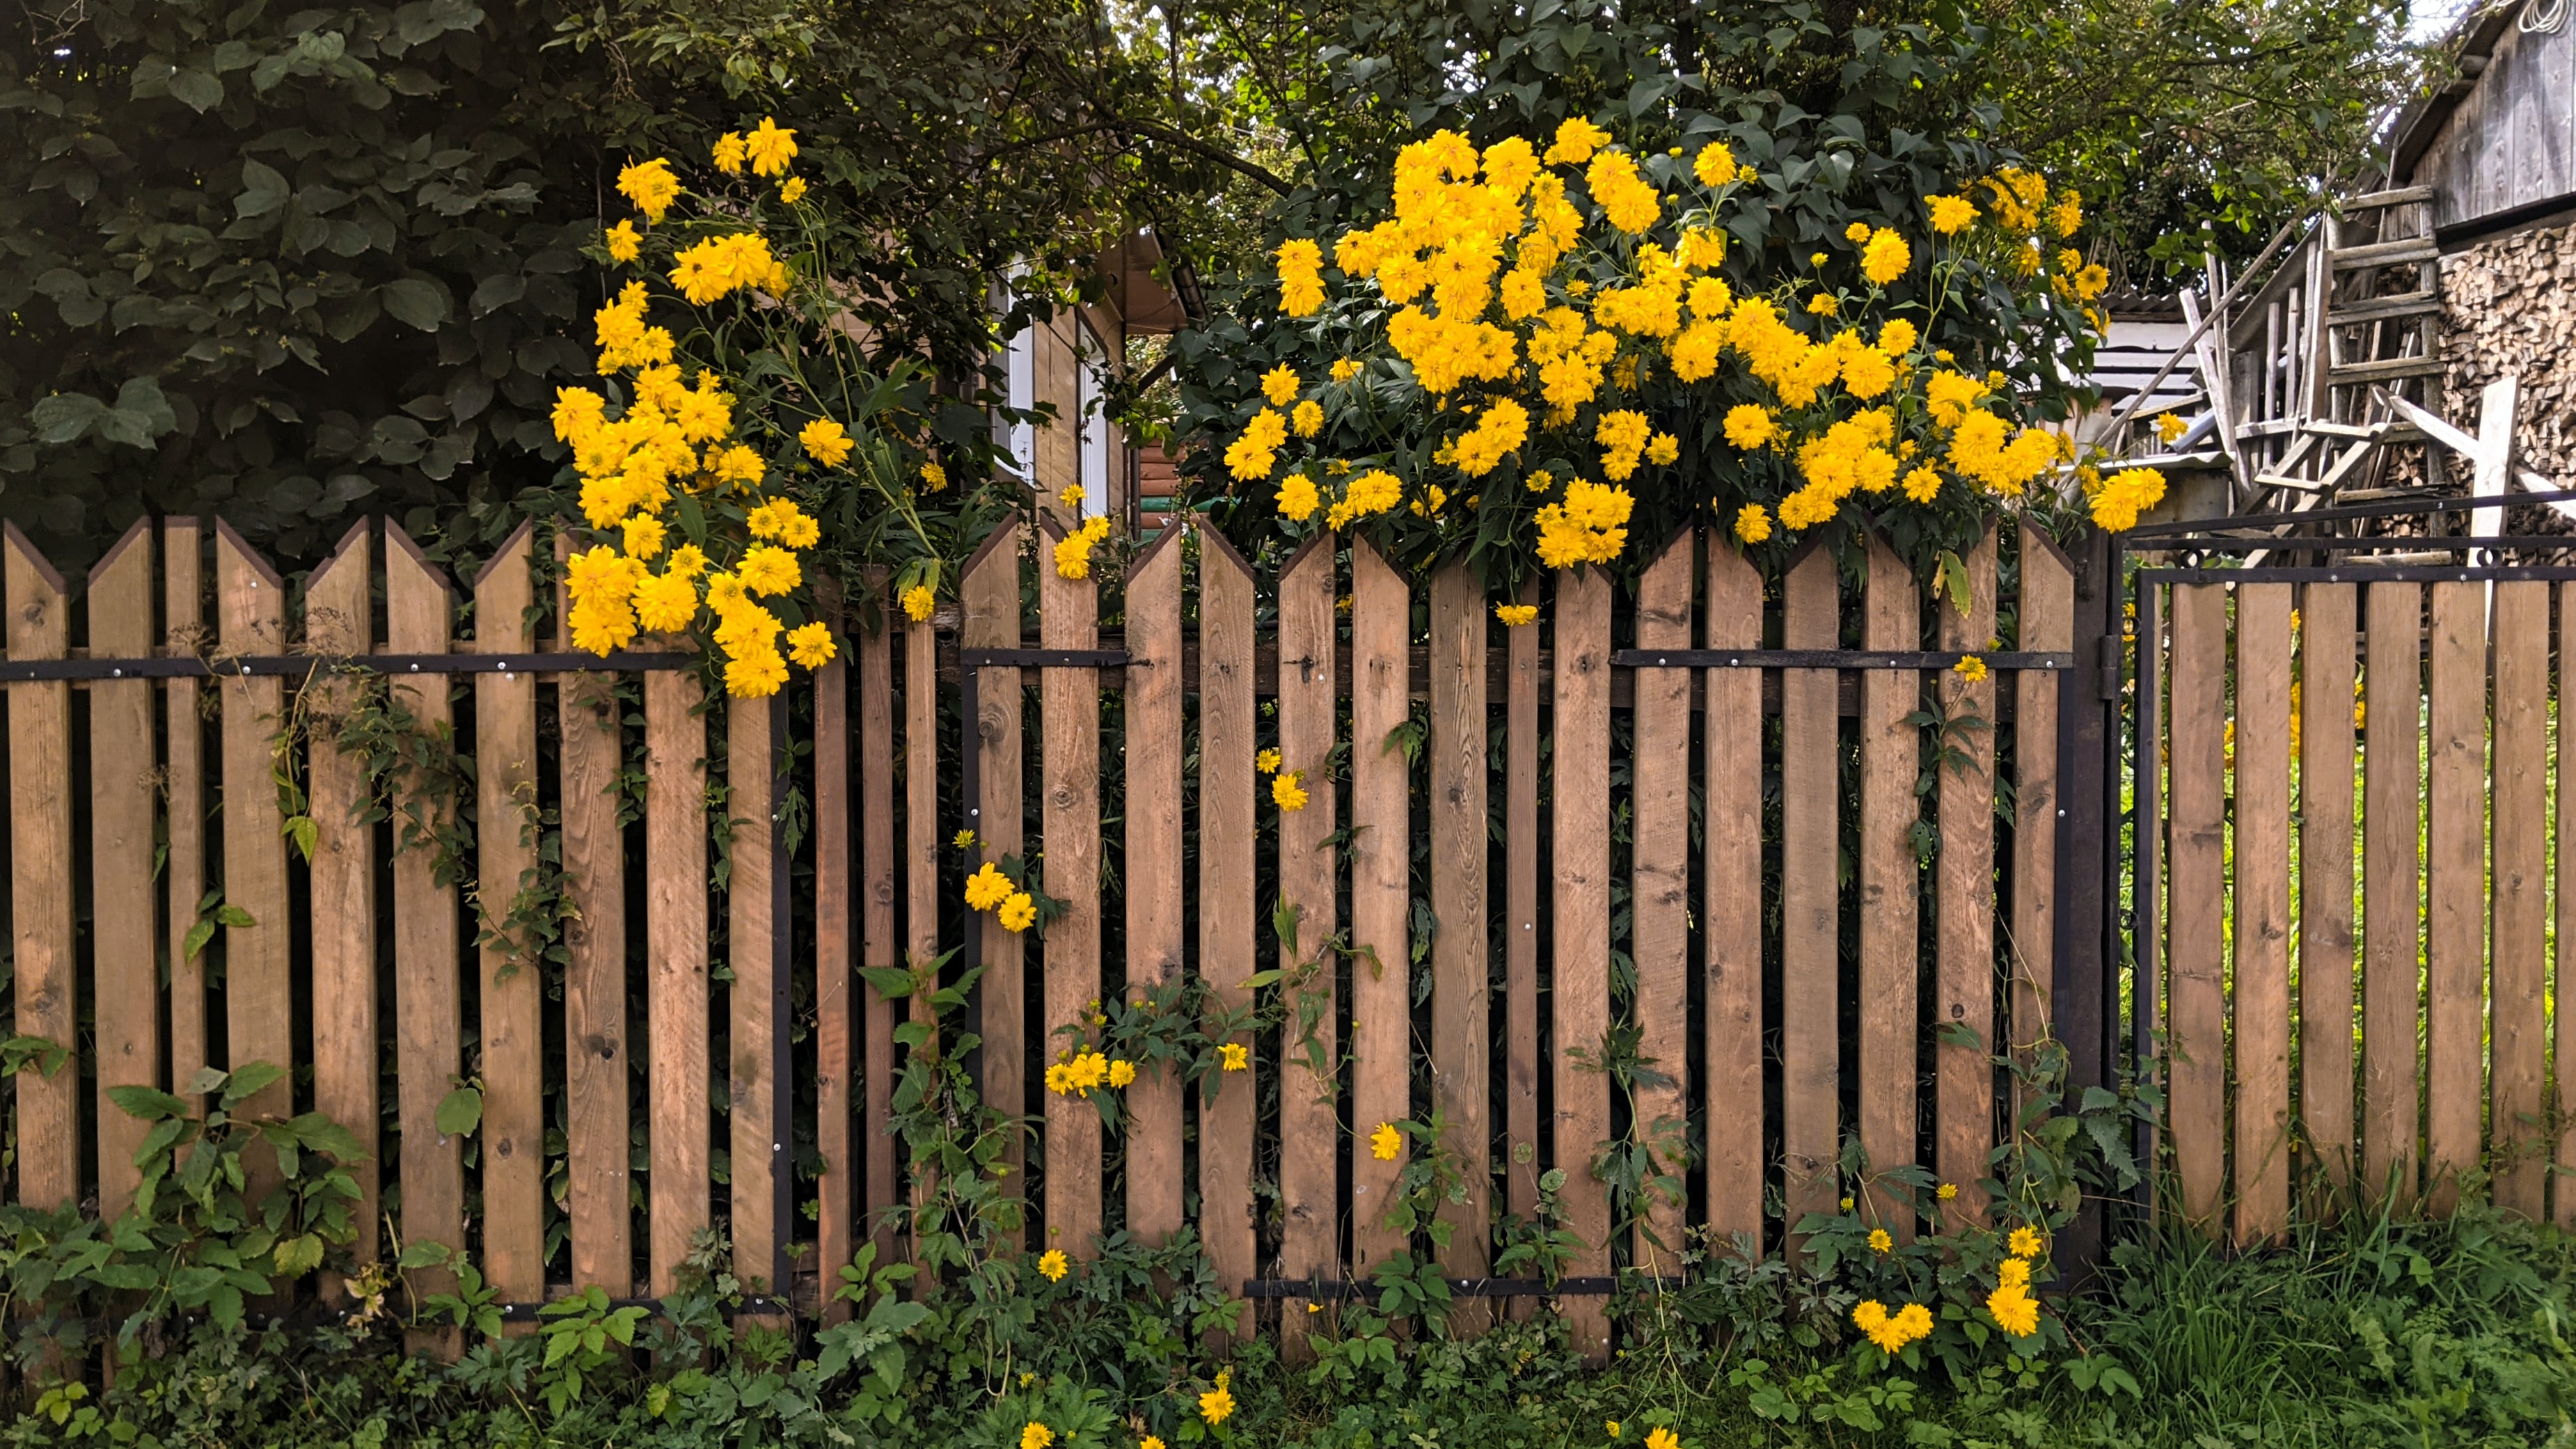 5 Reasons to Add a Gate to Your Fence